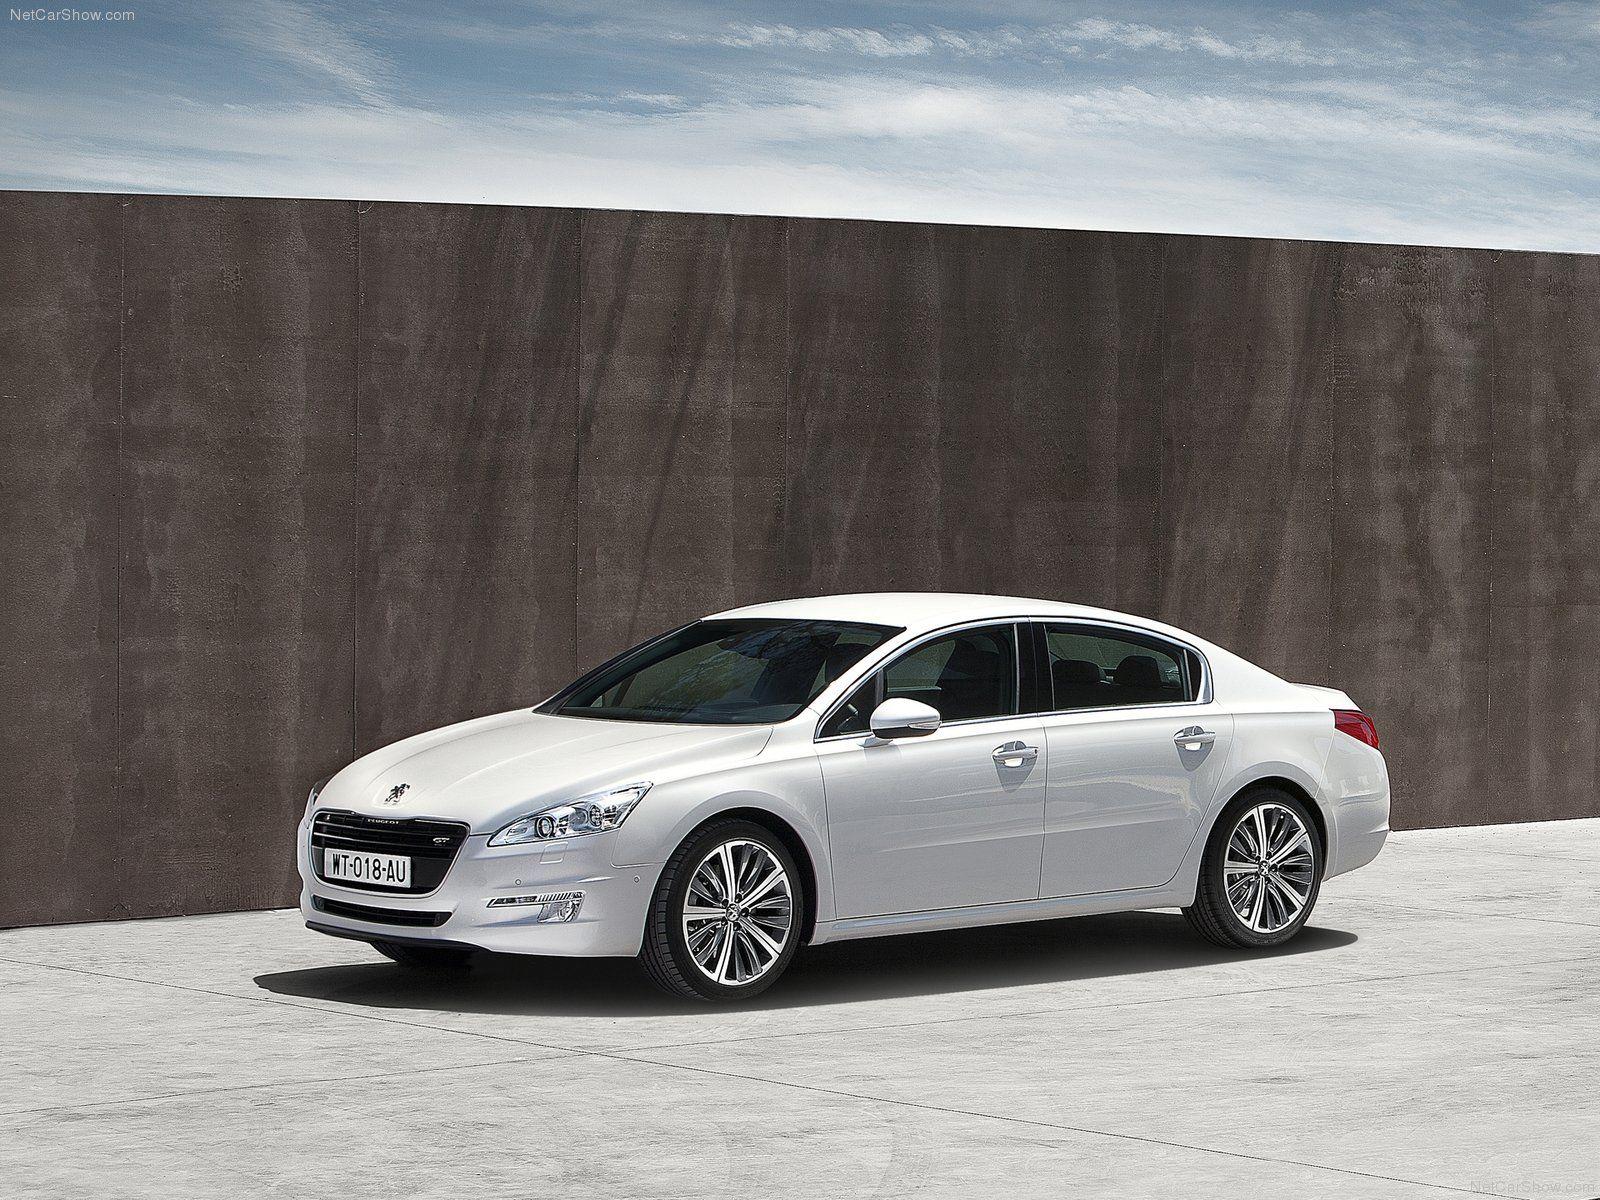 Peugeot 508 picture # 75614. Peugeot photo gallery